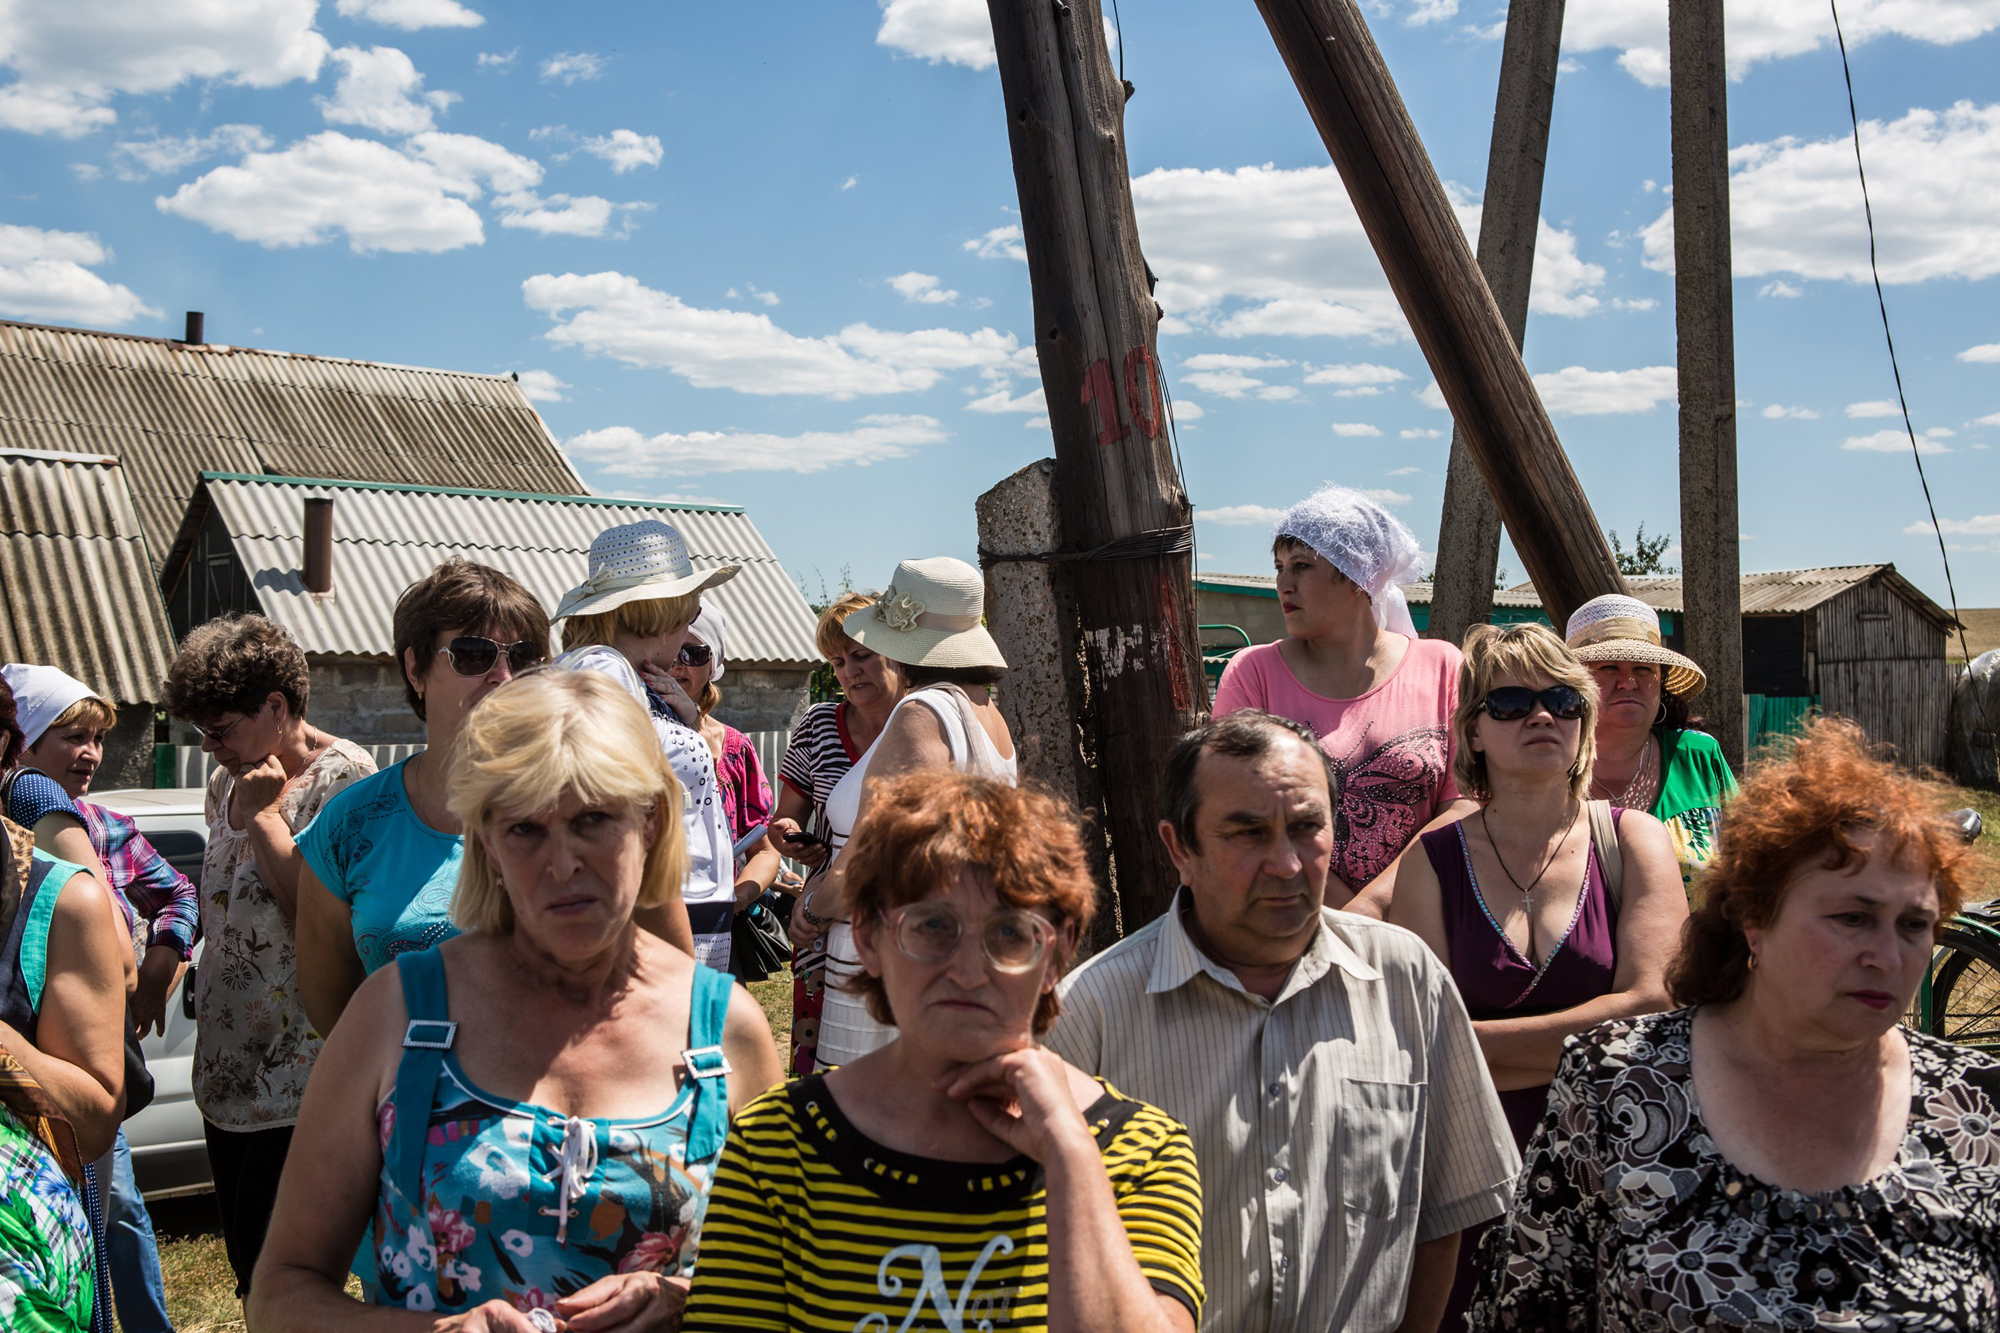 Local residents gather to watch as the bodies of victims of Malaysia Airlines Flight 17 are removed from the scene of the crash on July 21, 2014 in Grabovo, Ukraine.